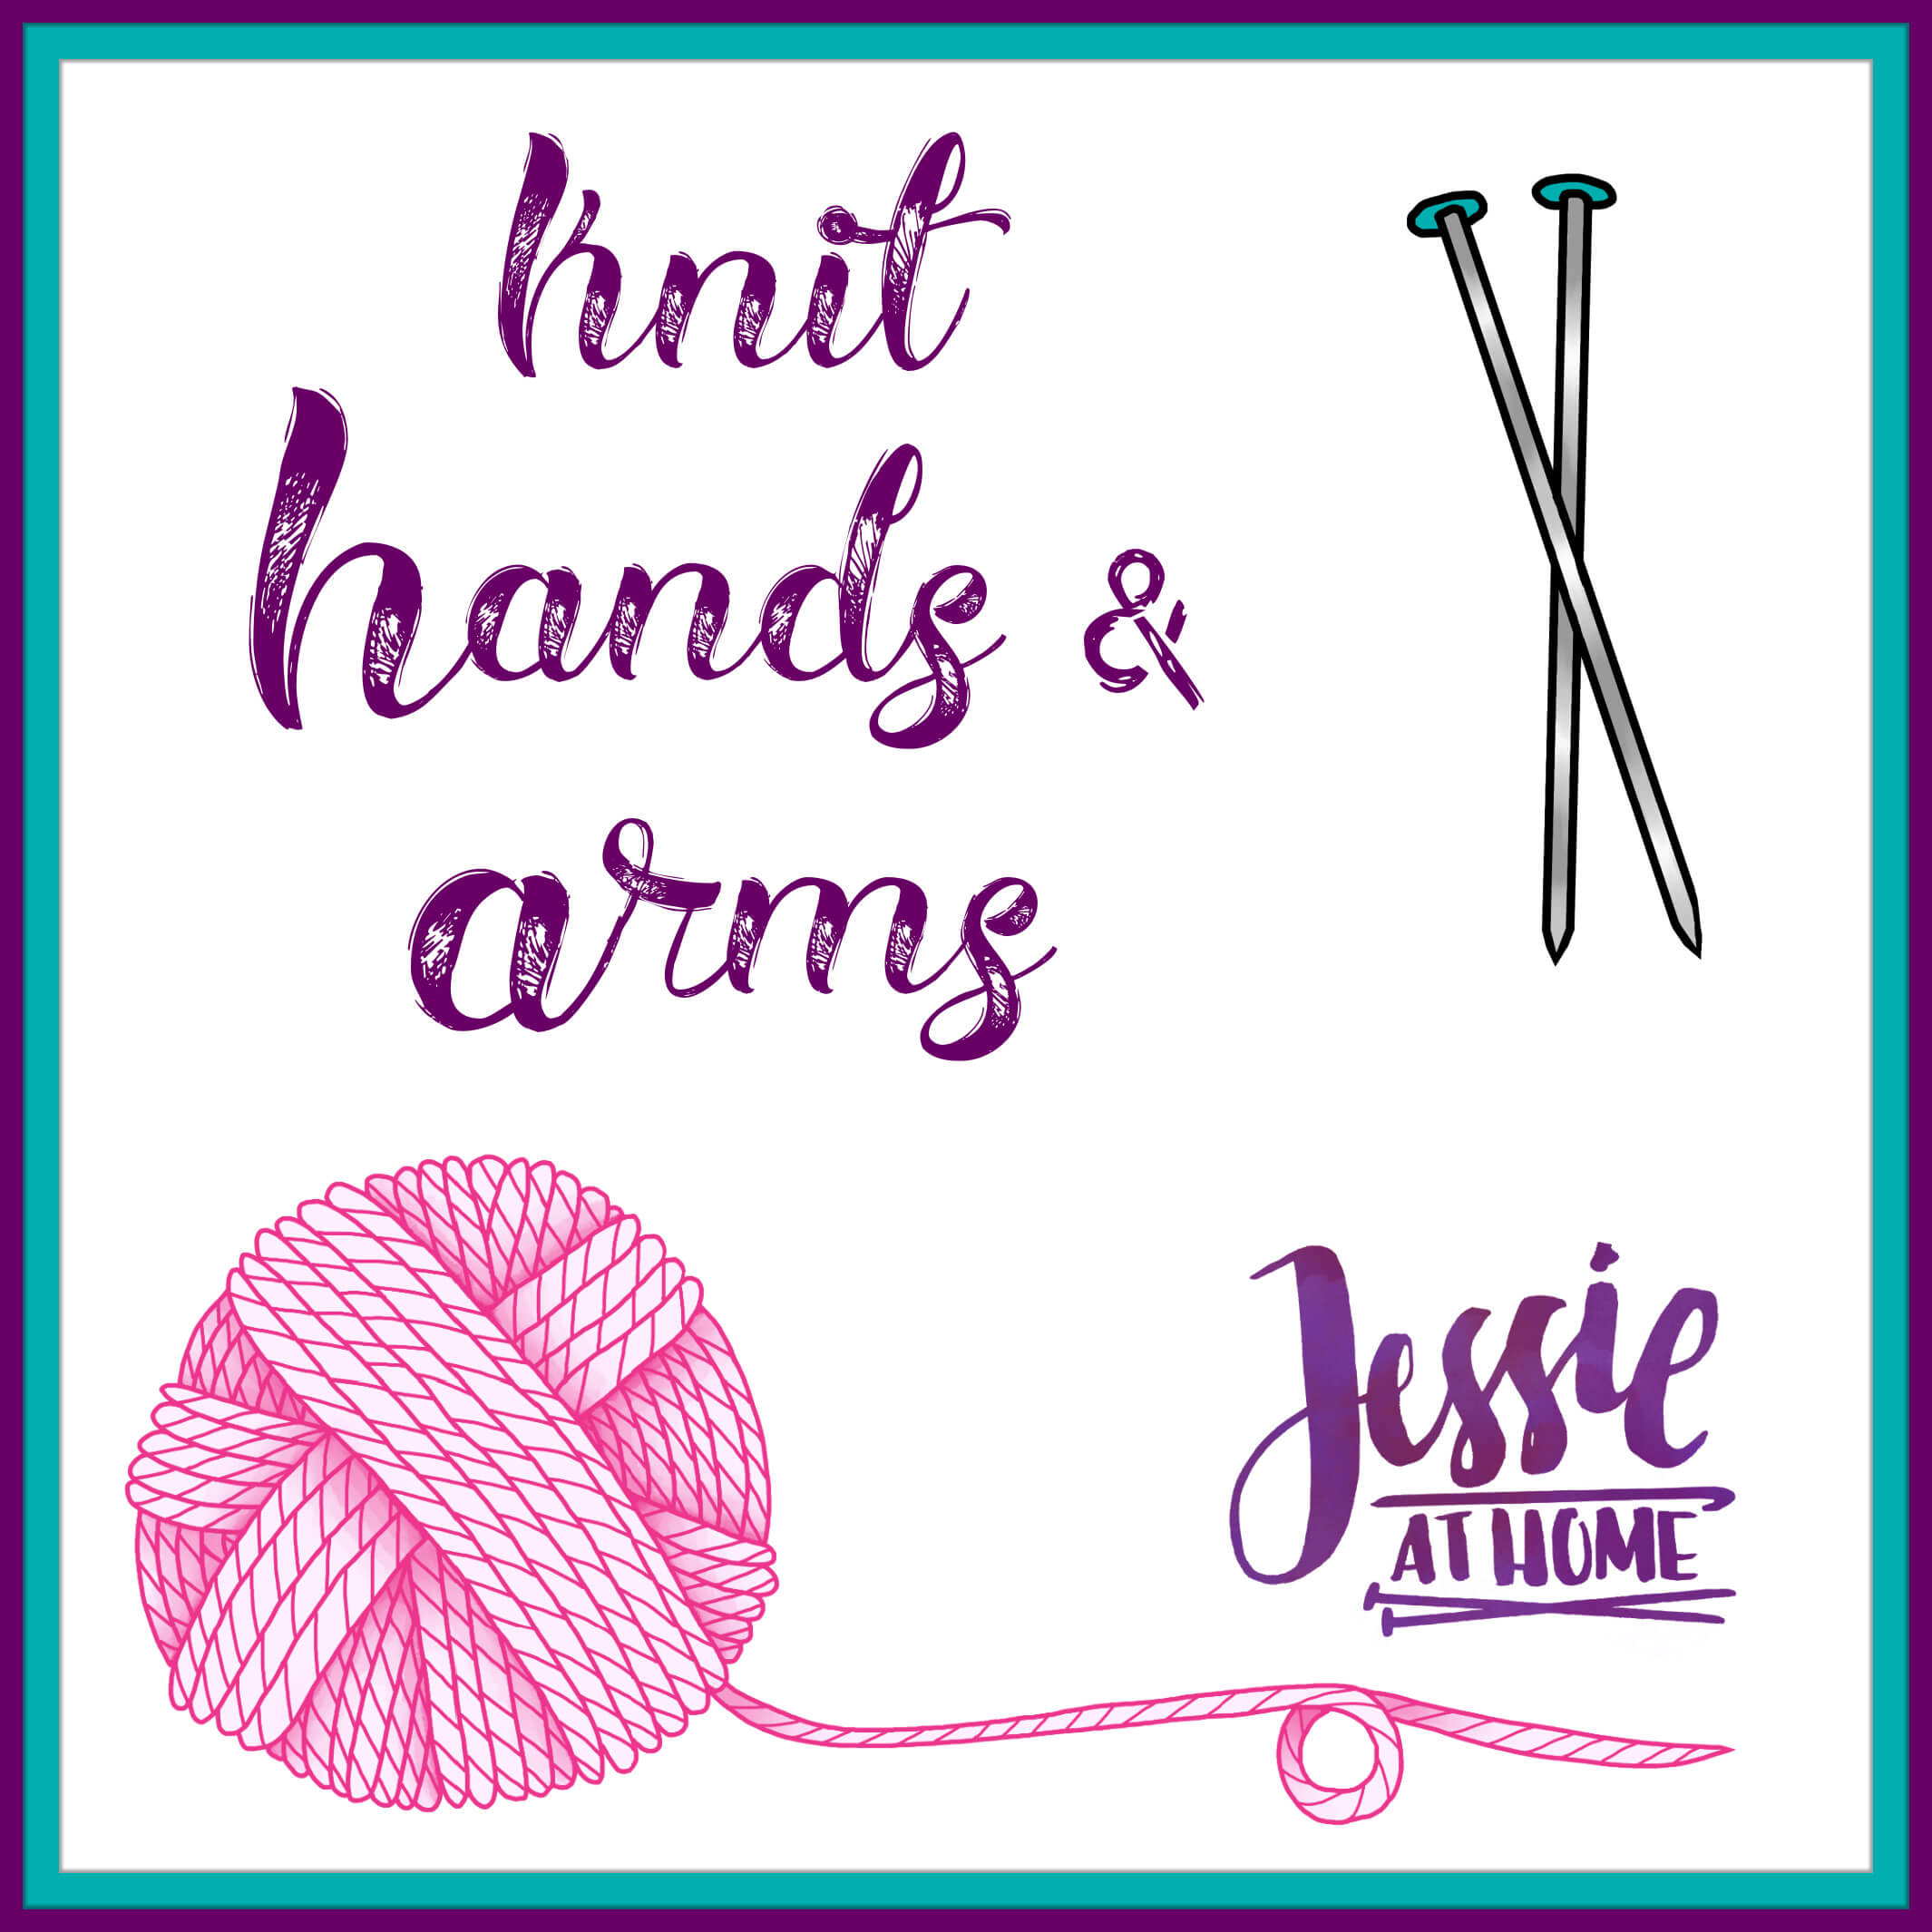 Knit Hands & Arms Menu on Jessie At Home